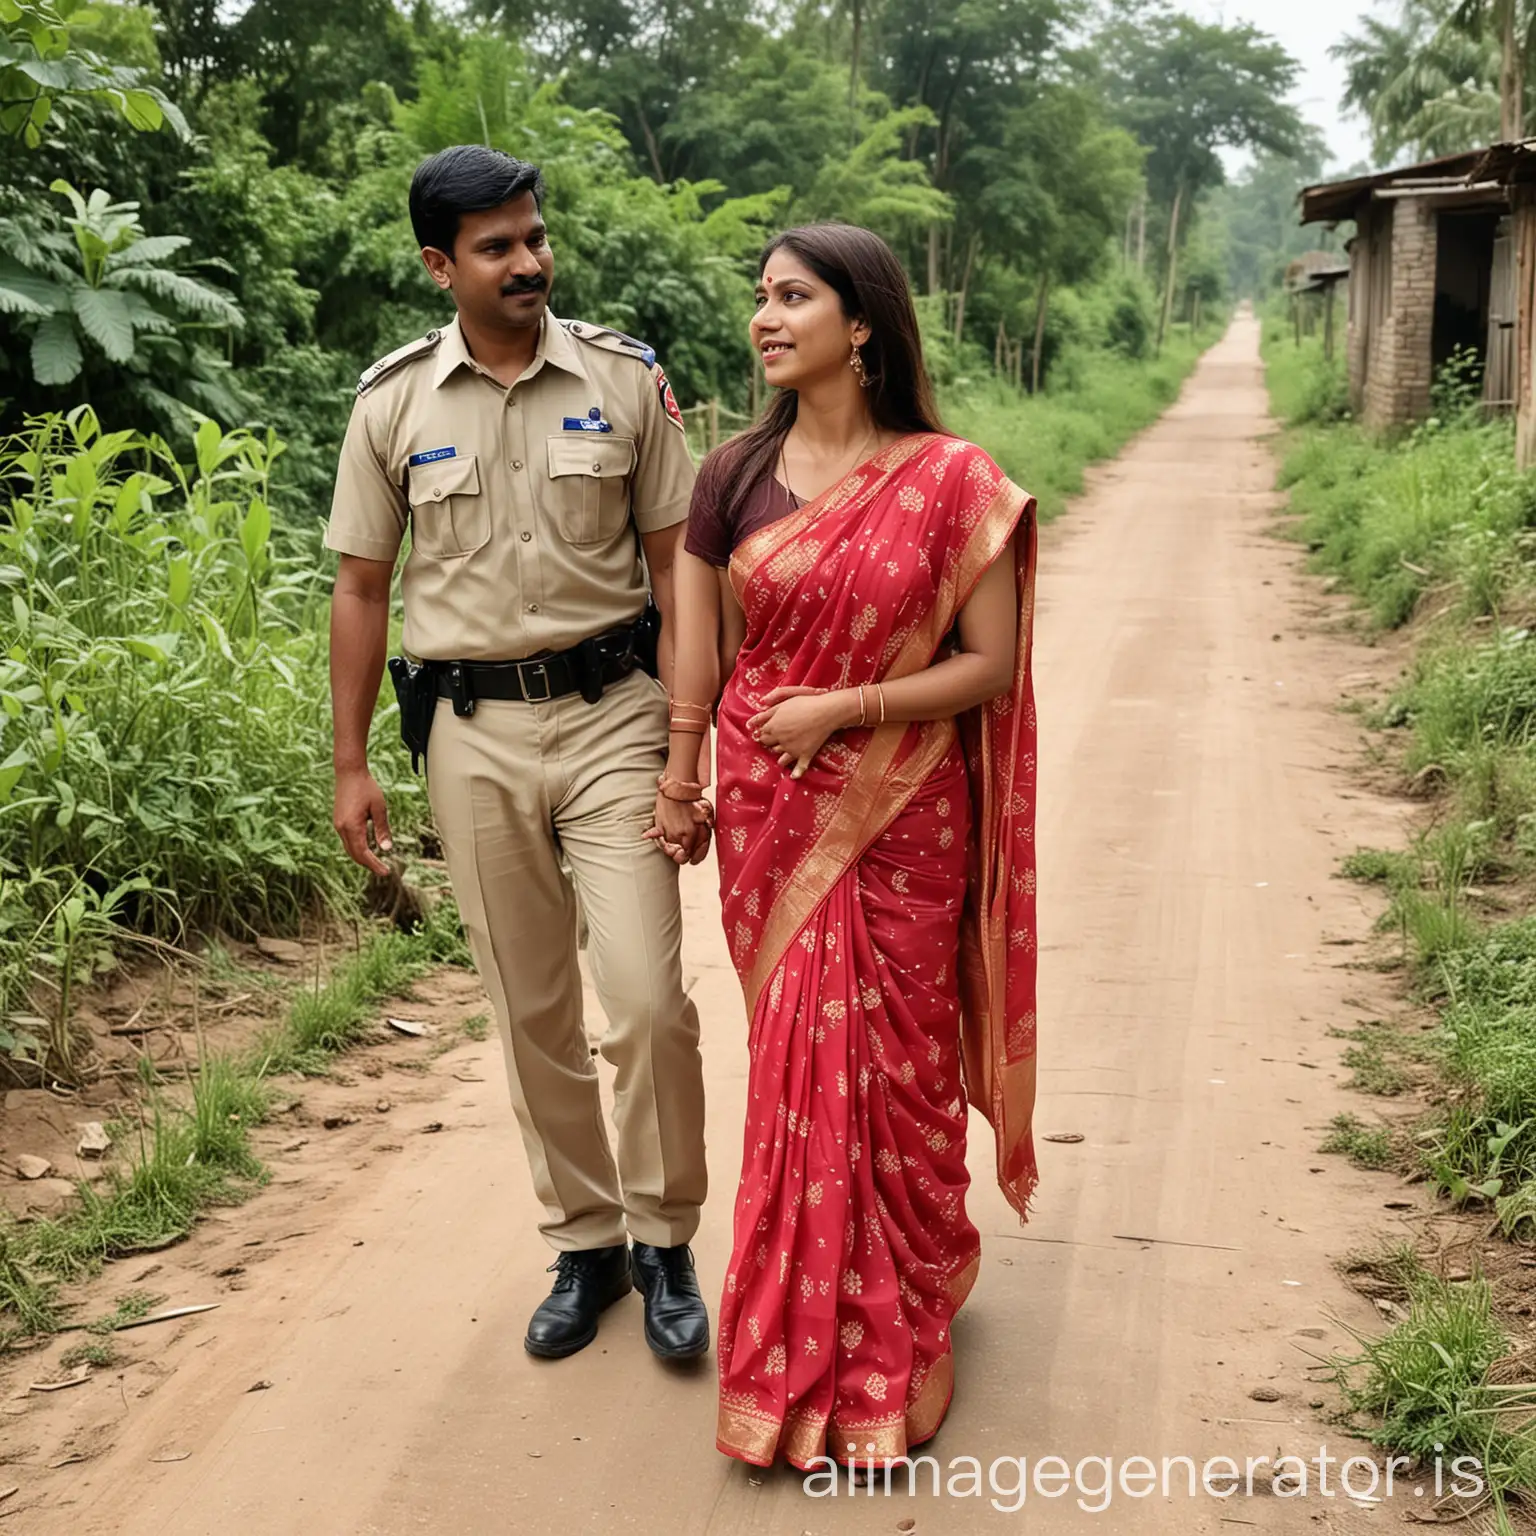 Indian Husband wearing saree to walking by village and wife wearing police uniform romance